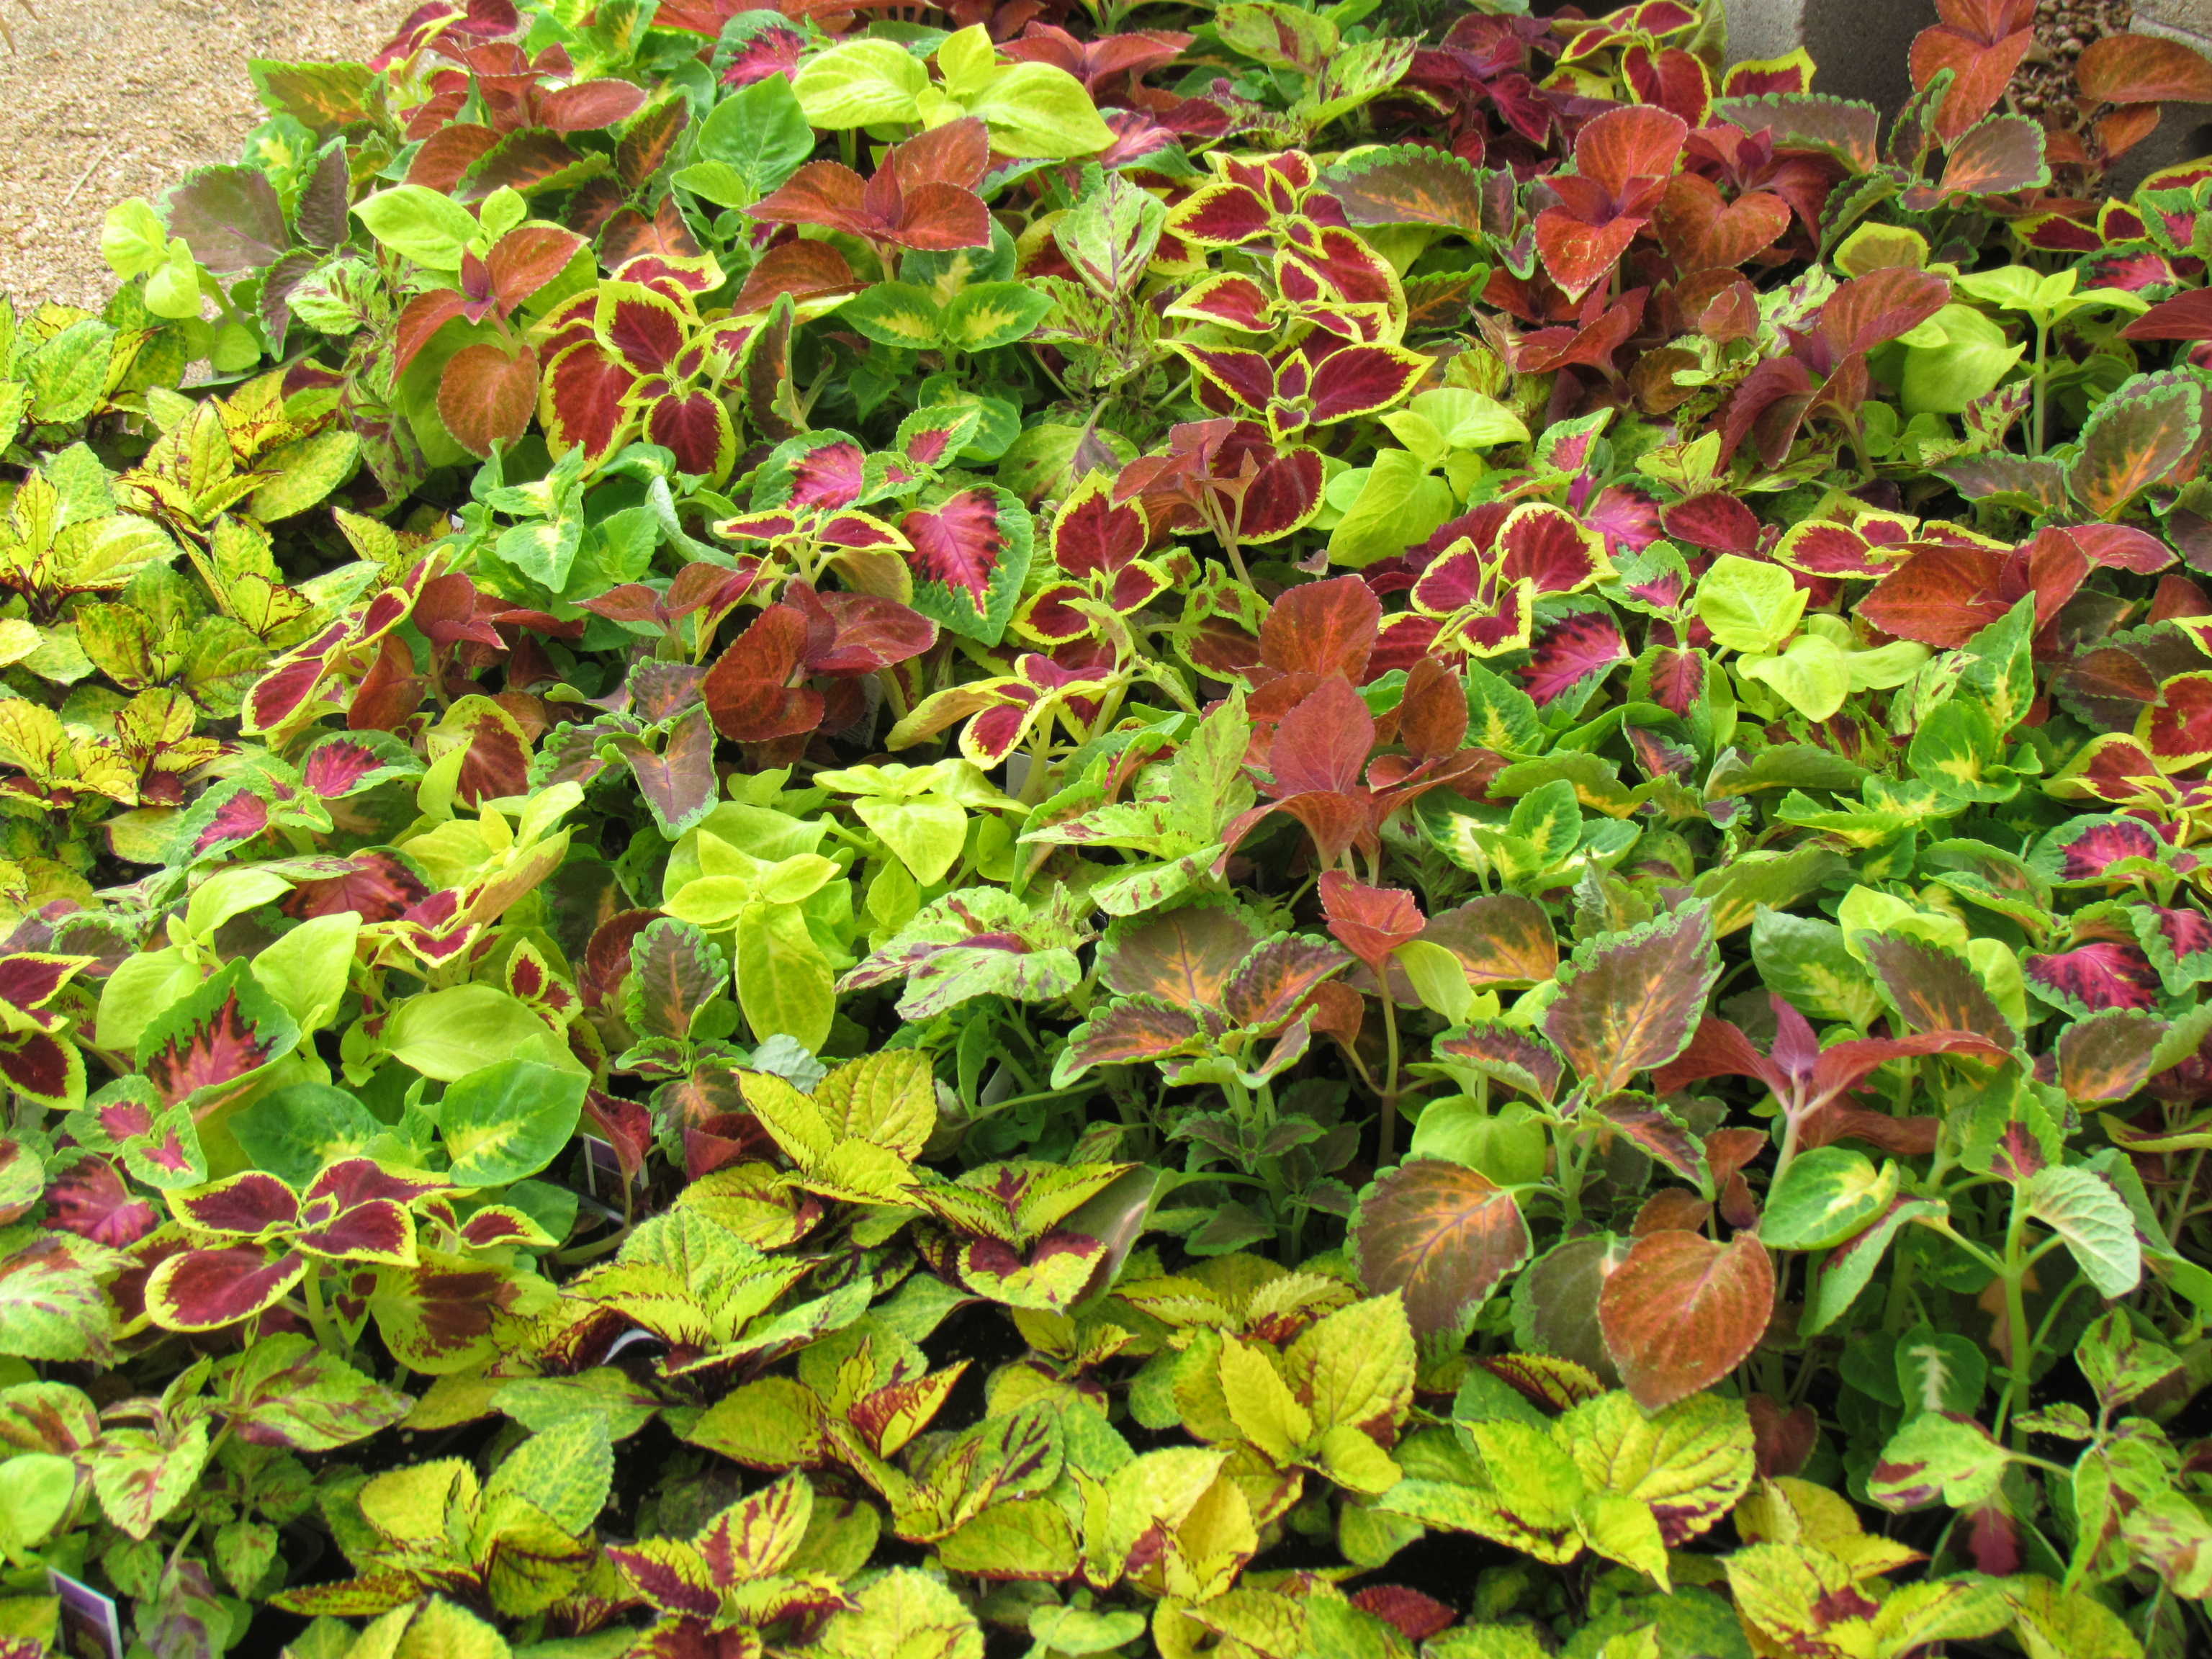 Large variety of ground cover such as this Coleus and more at J&J Nursery, Spring, TX